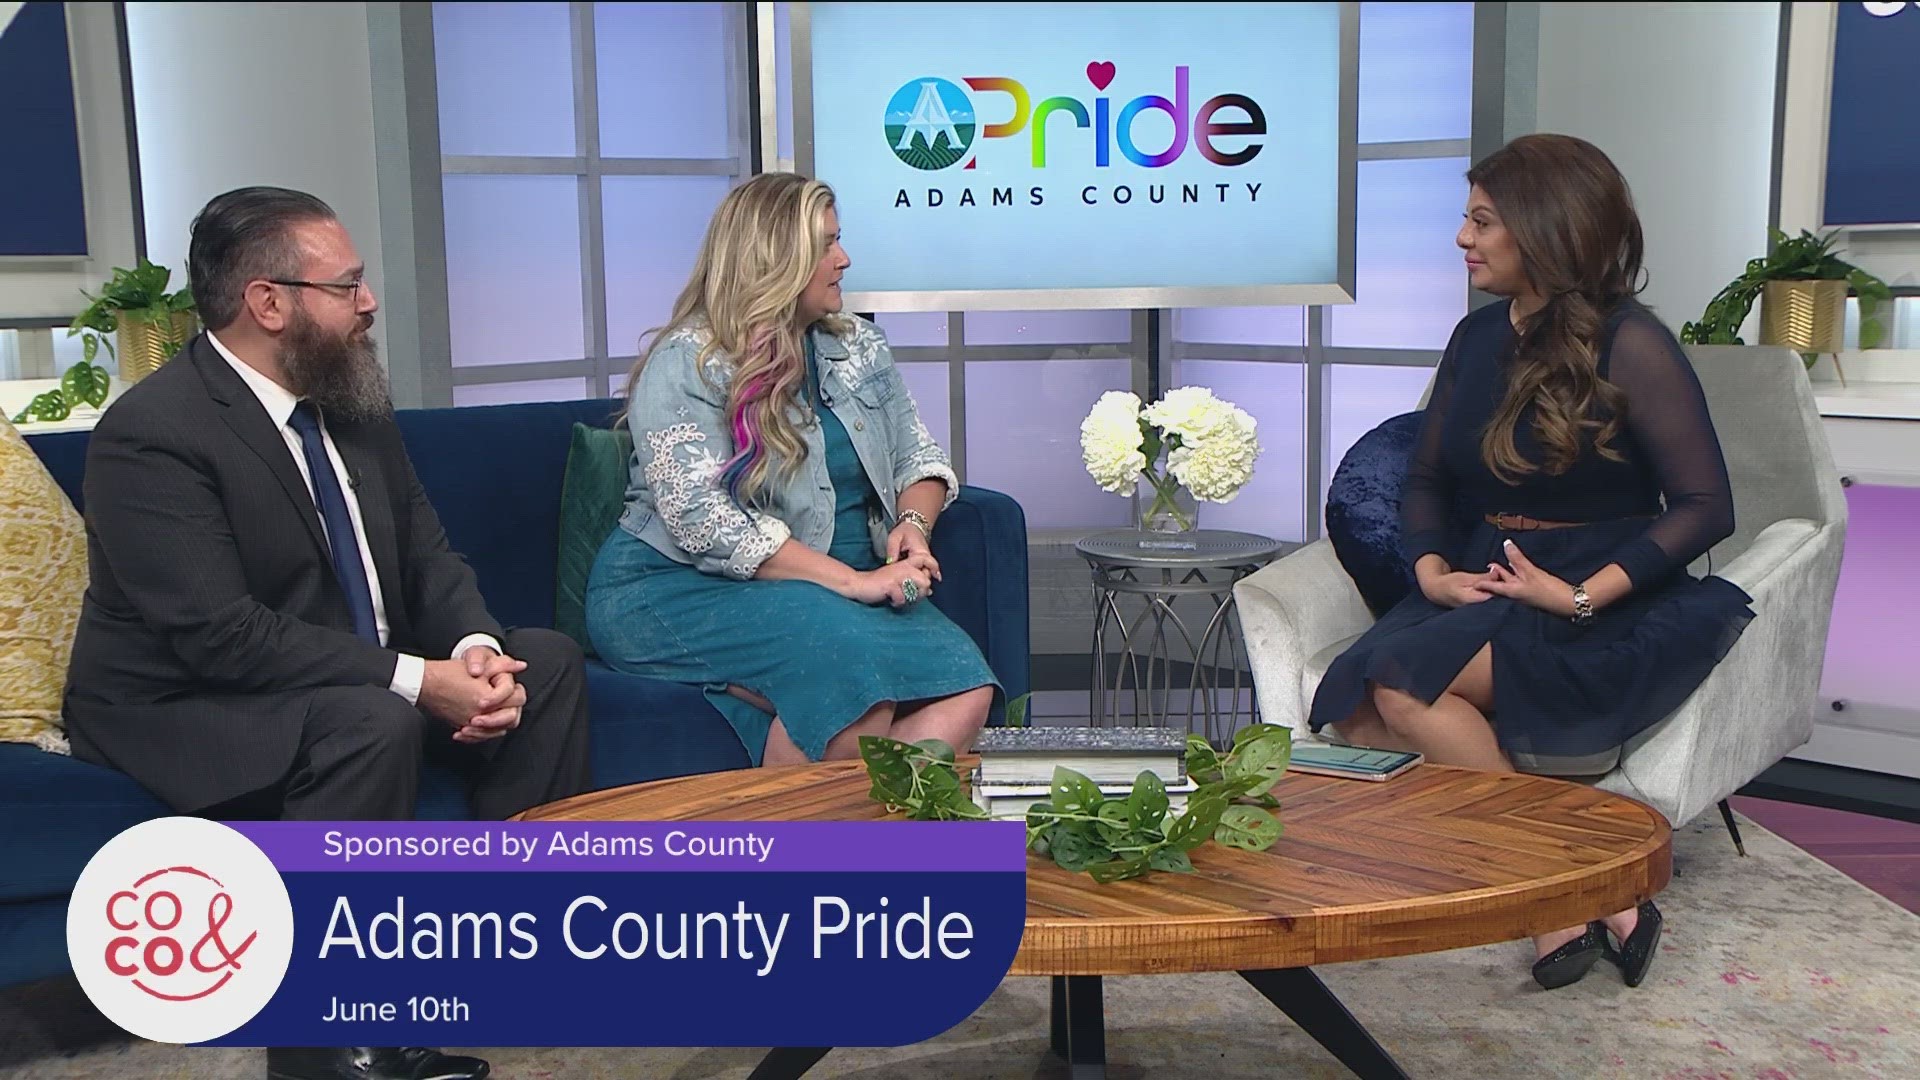 Take pride in who you are at the Adams County Pride Festival on June 10th. Enjoy food, fun, and a concert from Bebe Rexha. There's also Marriage Palooza. **PAID**